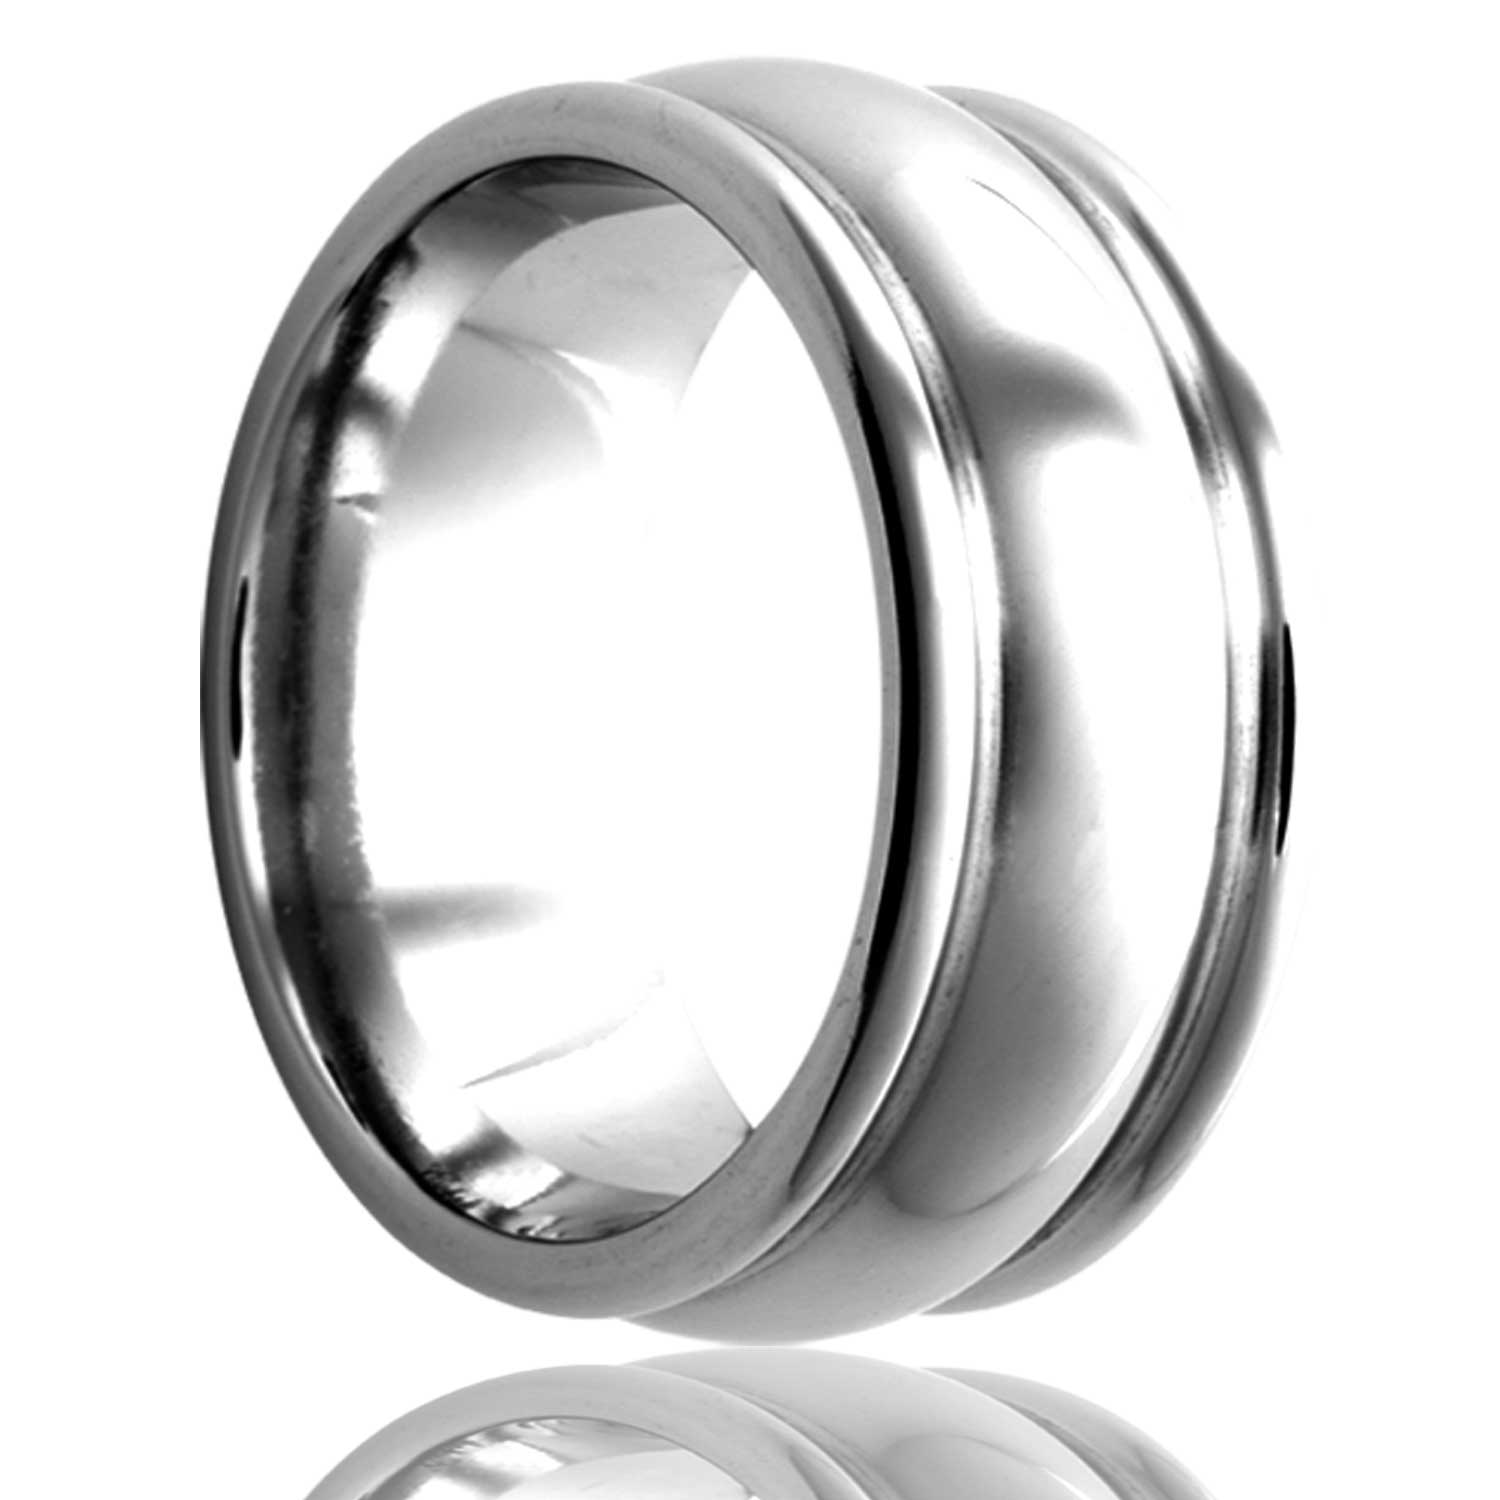 A domed platinum wedding band with stepped & grooved edges displayed on a neutral white background.